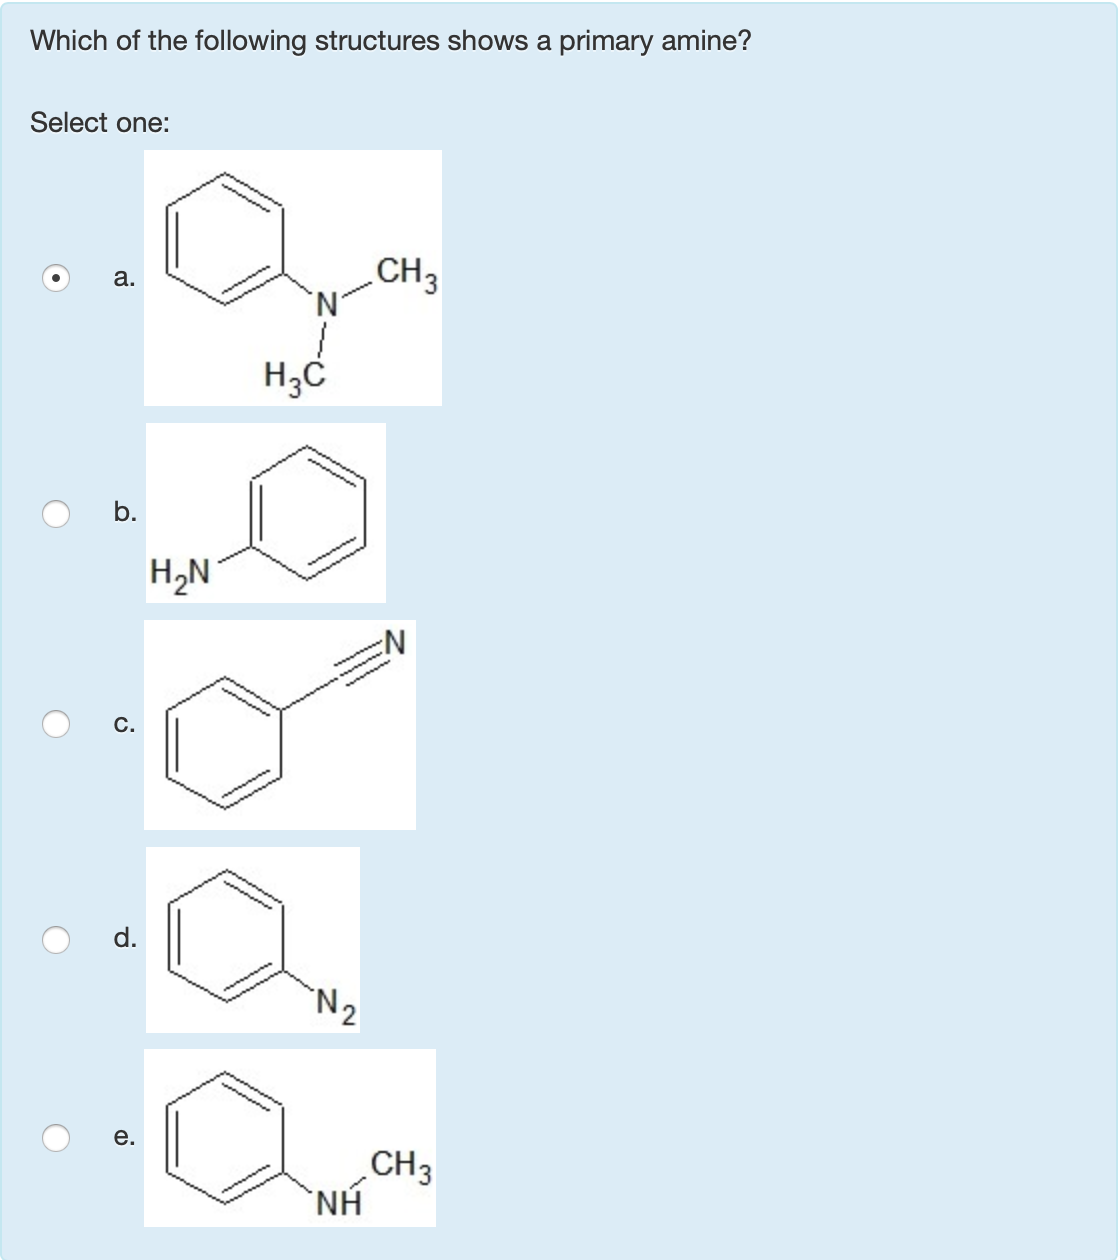 Which of the following structures shows a primary amine?
